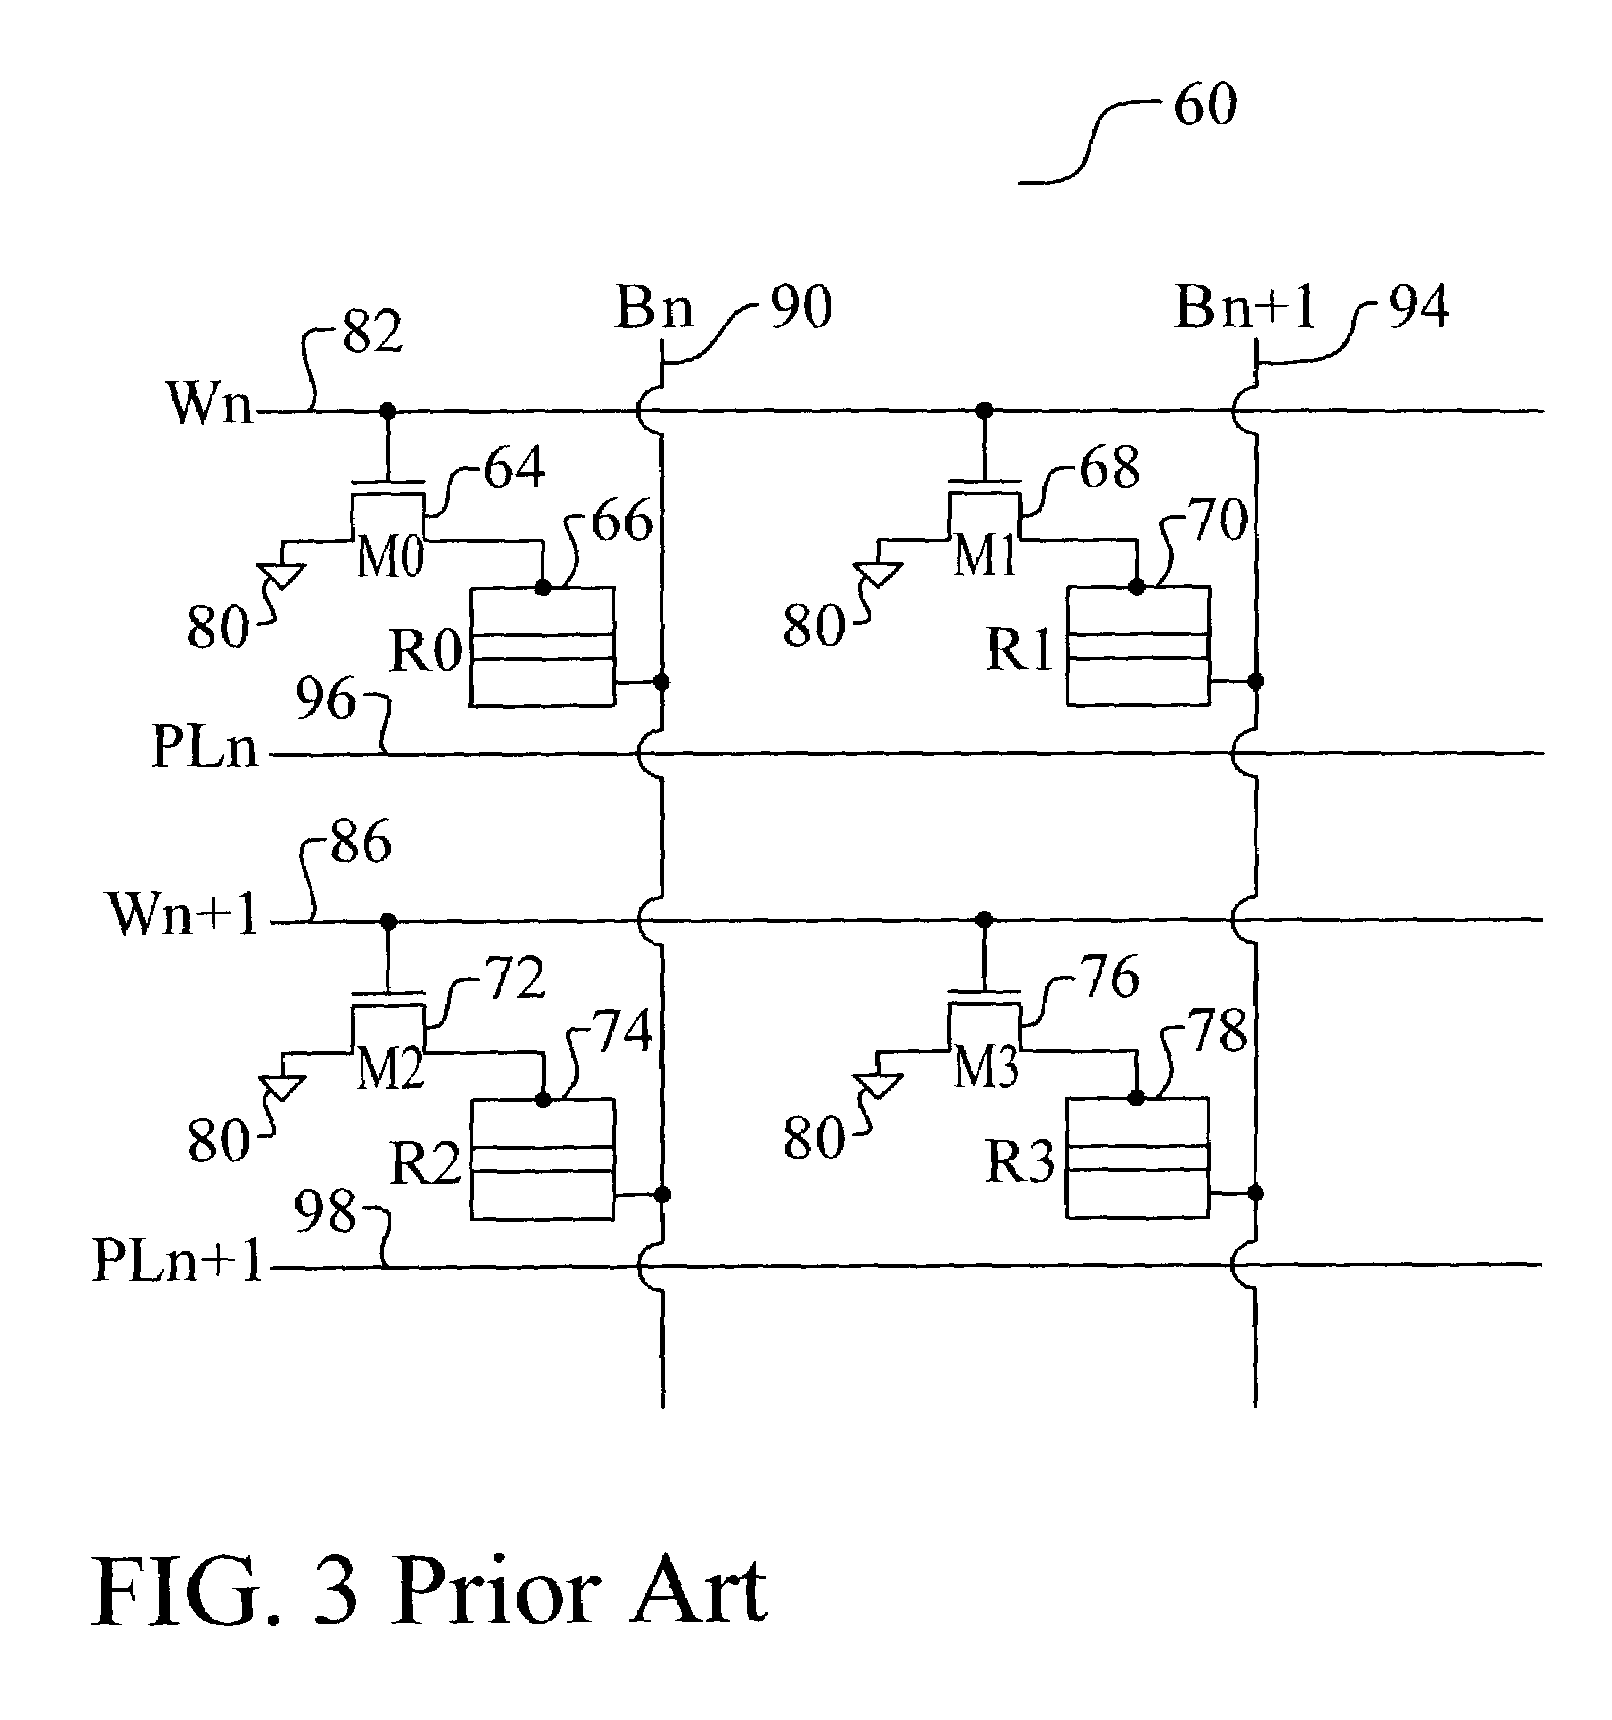 Magnetic RAM and array architecture using a two transistor, one MTJ cell